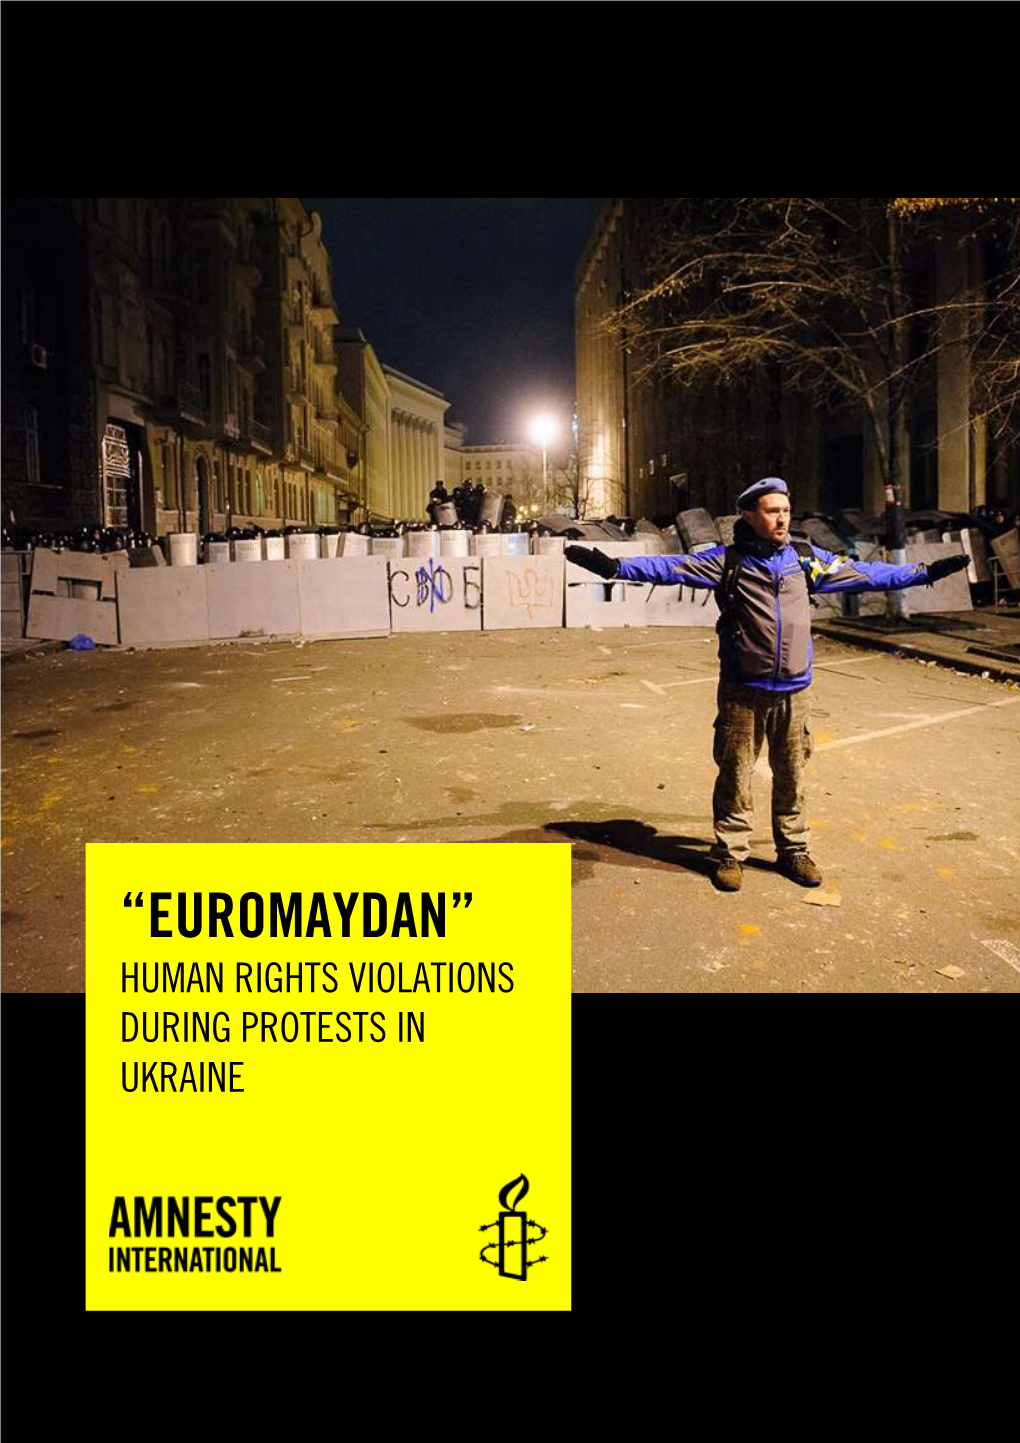 “Euromaydan” Human Rights Violations During Protests in Ukraine